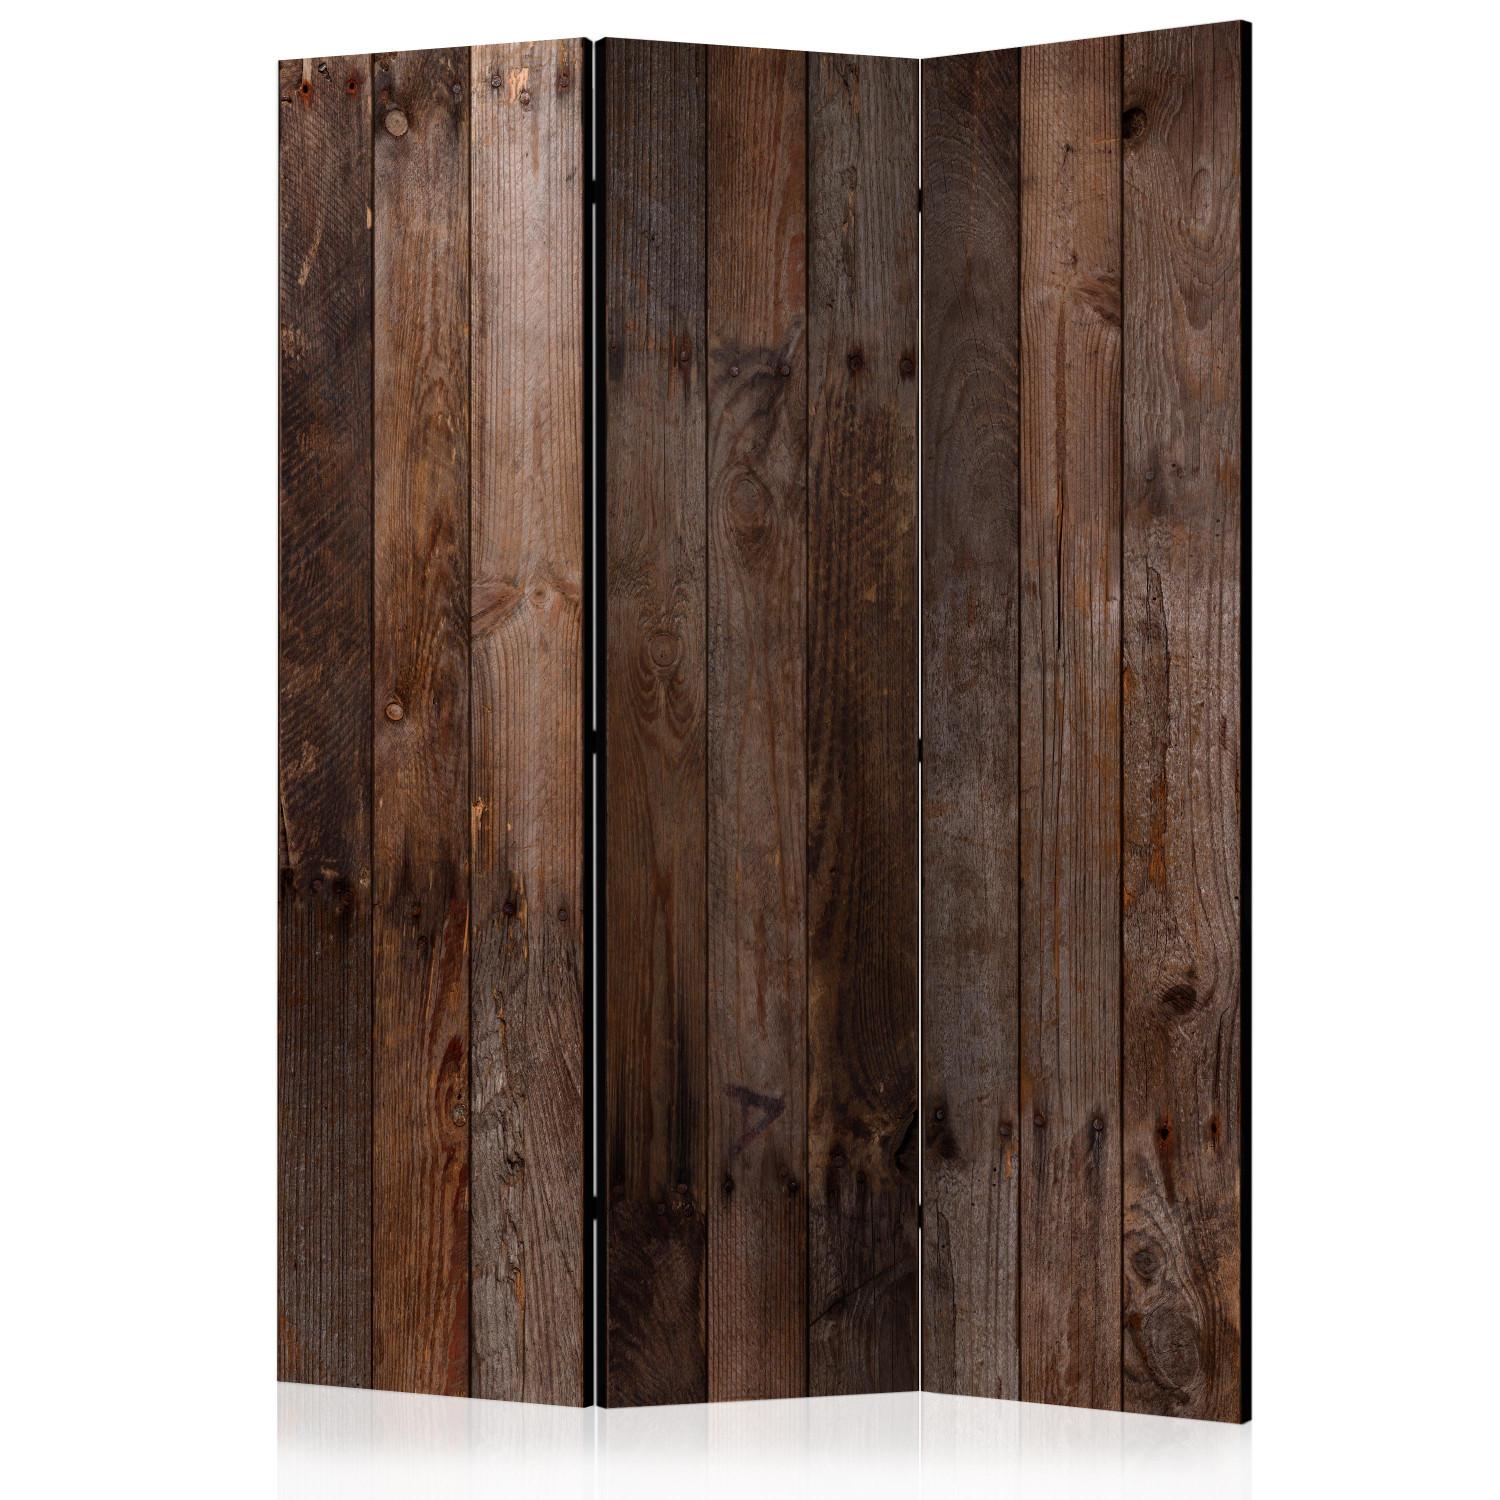 Room Divider Wooden Hut (3-piece) - background of intensely brown wood